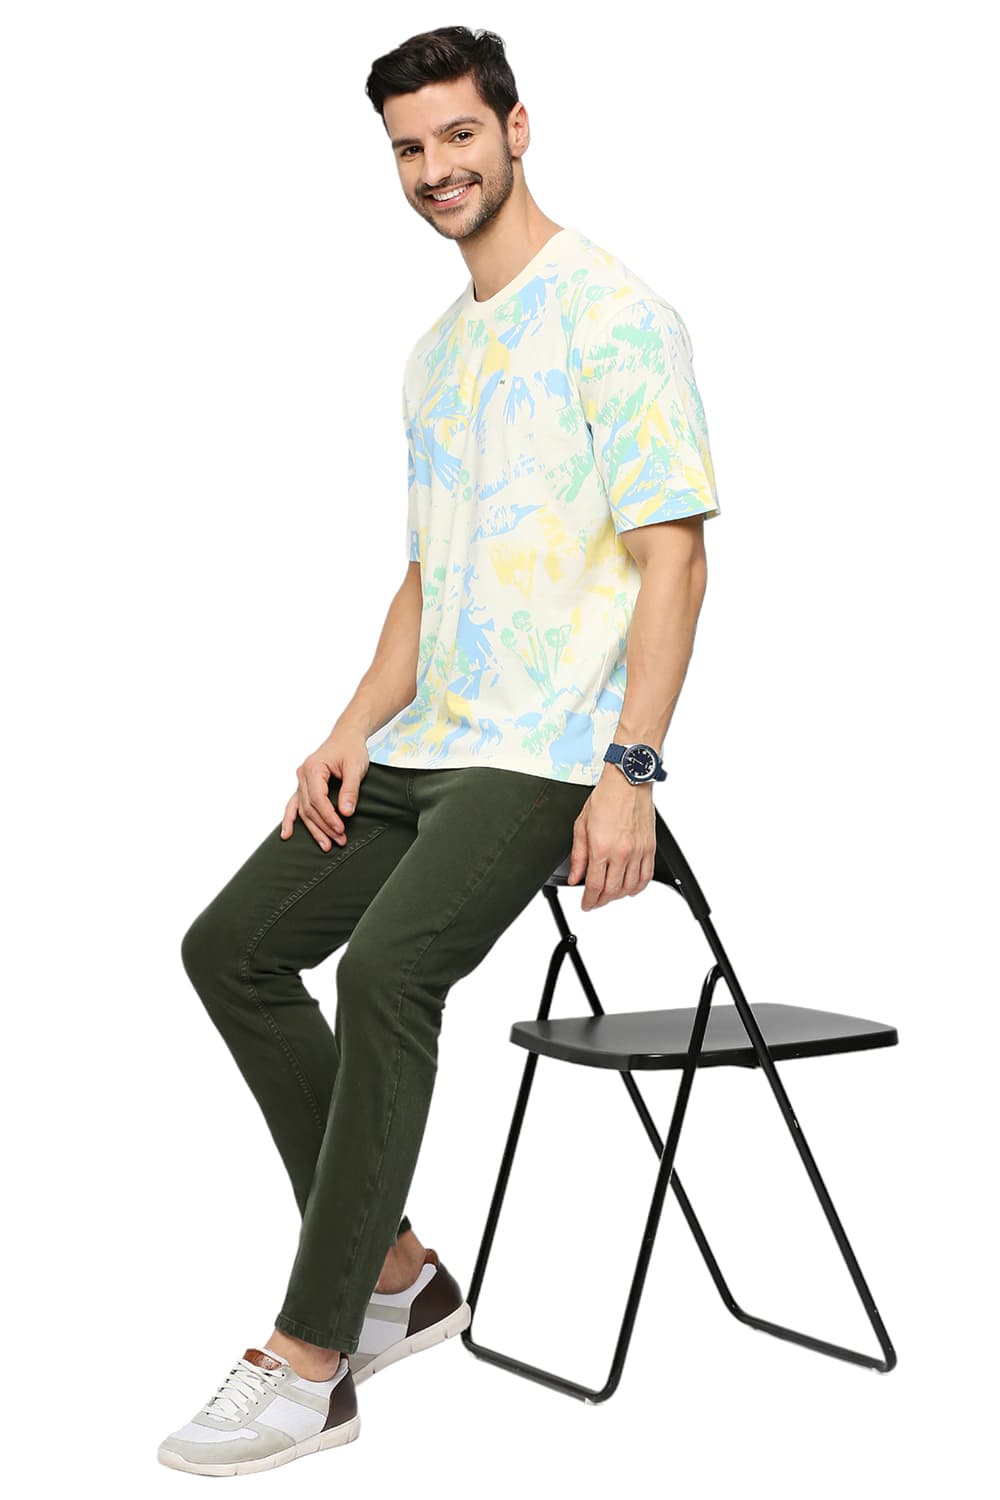 BASICS RELAXED FIT COTTON PRINTED CREW T-SHIRTS